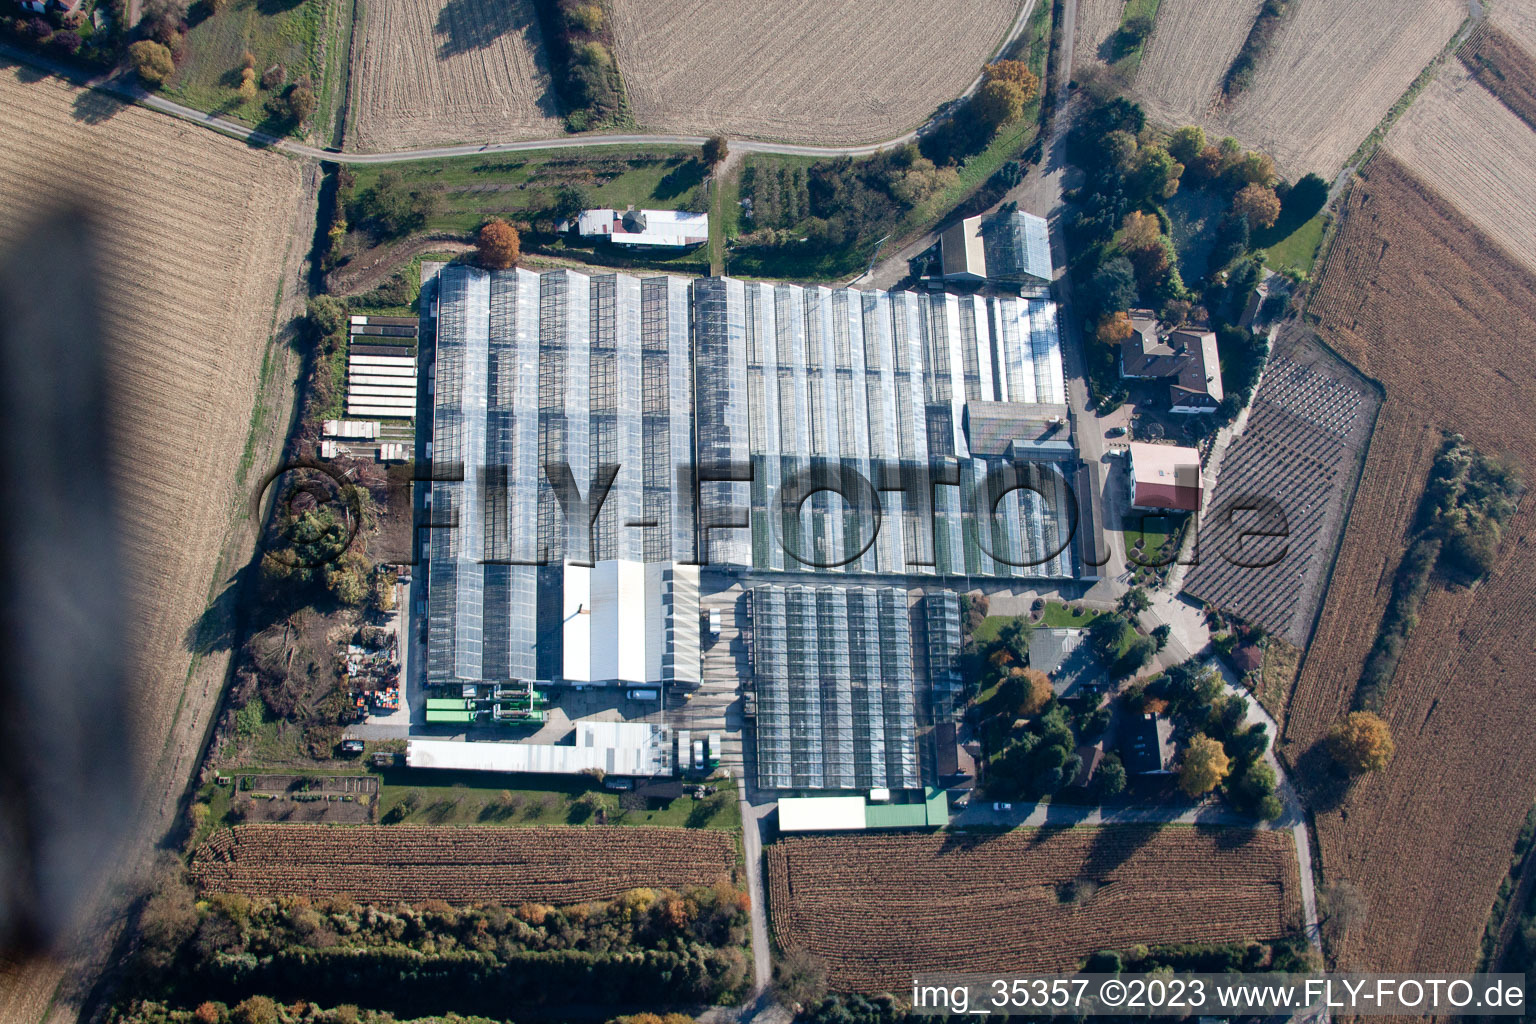 Geranium Endisch GmbH in Hagenbach in the state Rhineland-Palatinate, Germany viewn from the air